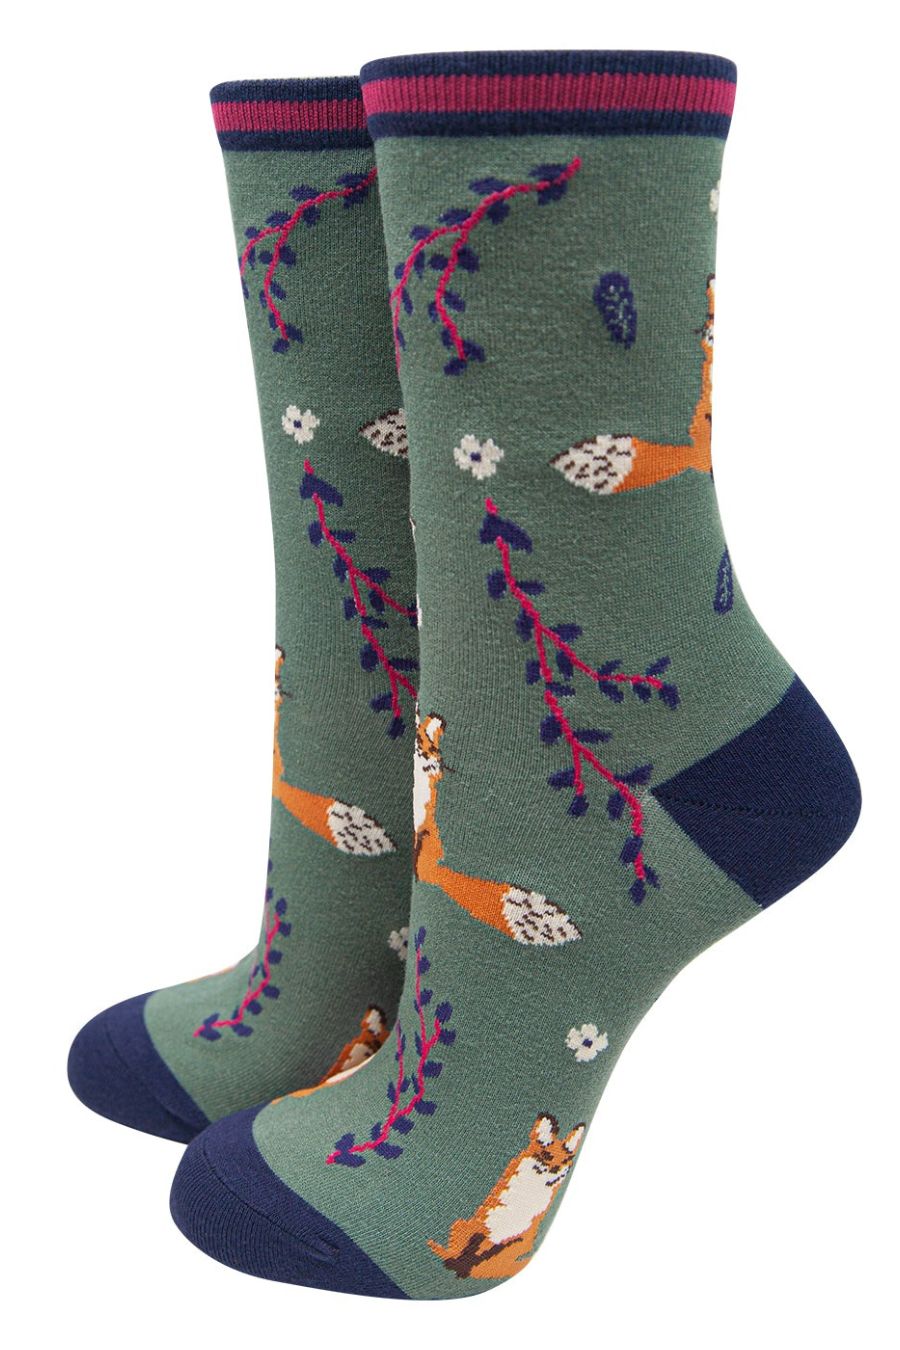 sage green, navy blue ankle socks with red foxes and floral print